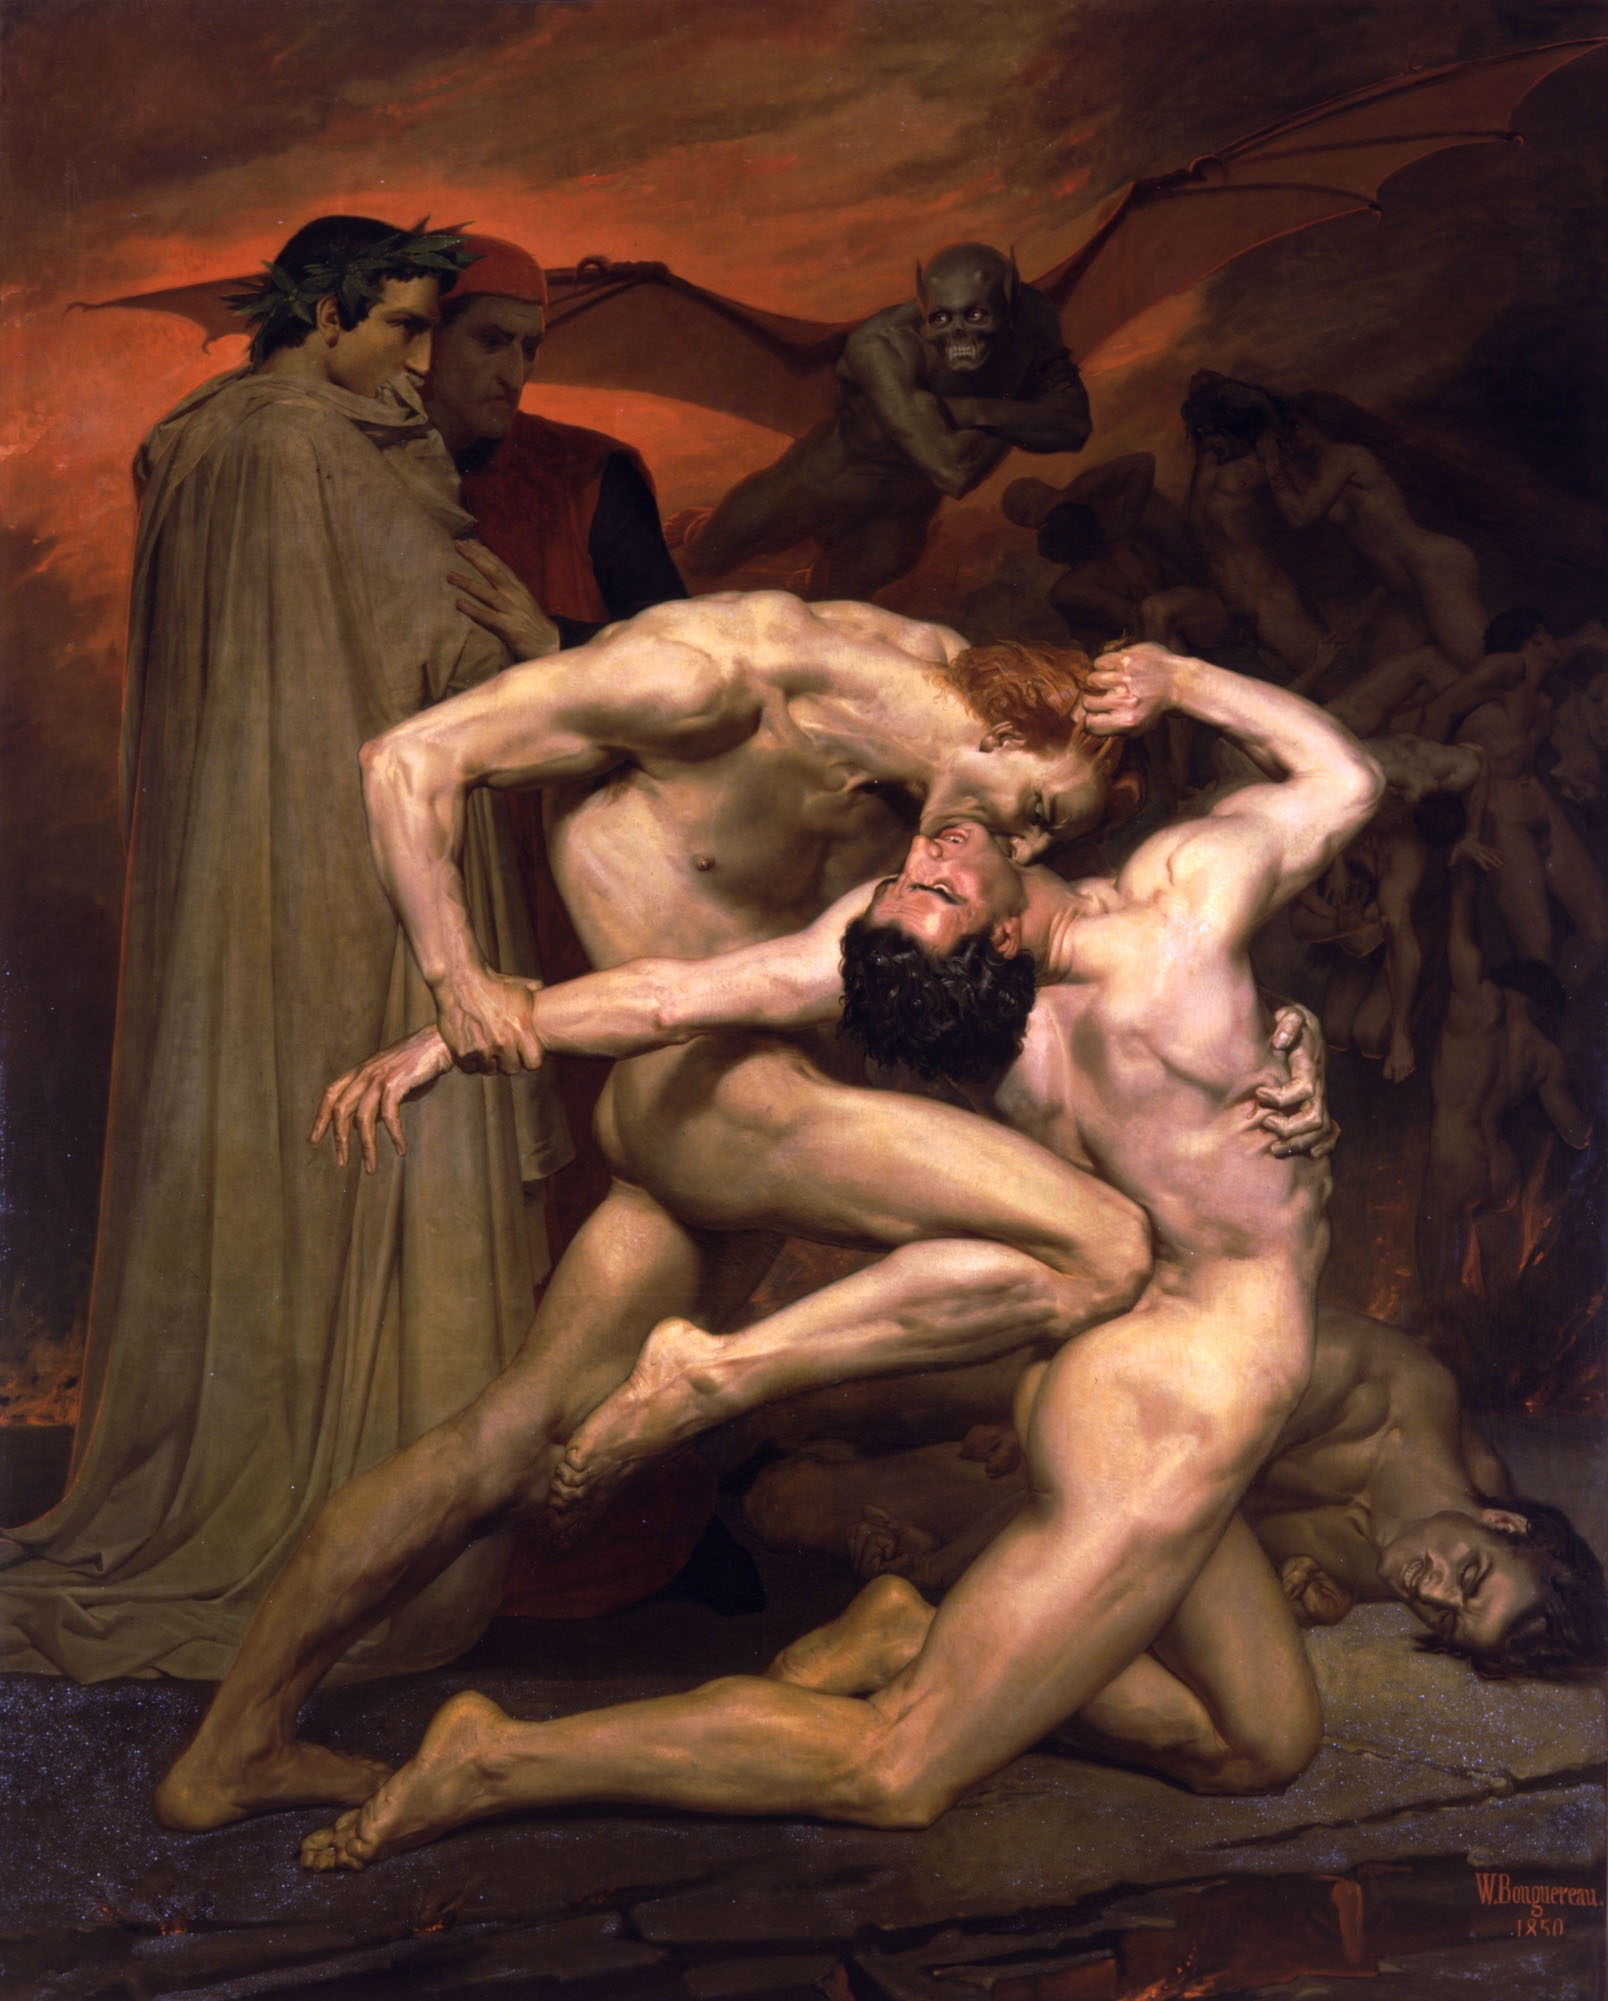 William-Adolphe_Bouguereau_(1825-1905)_-_Dante_And_Virgil_In_Hell_(1850)